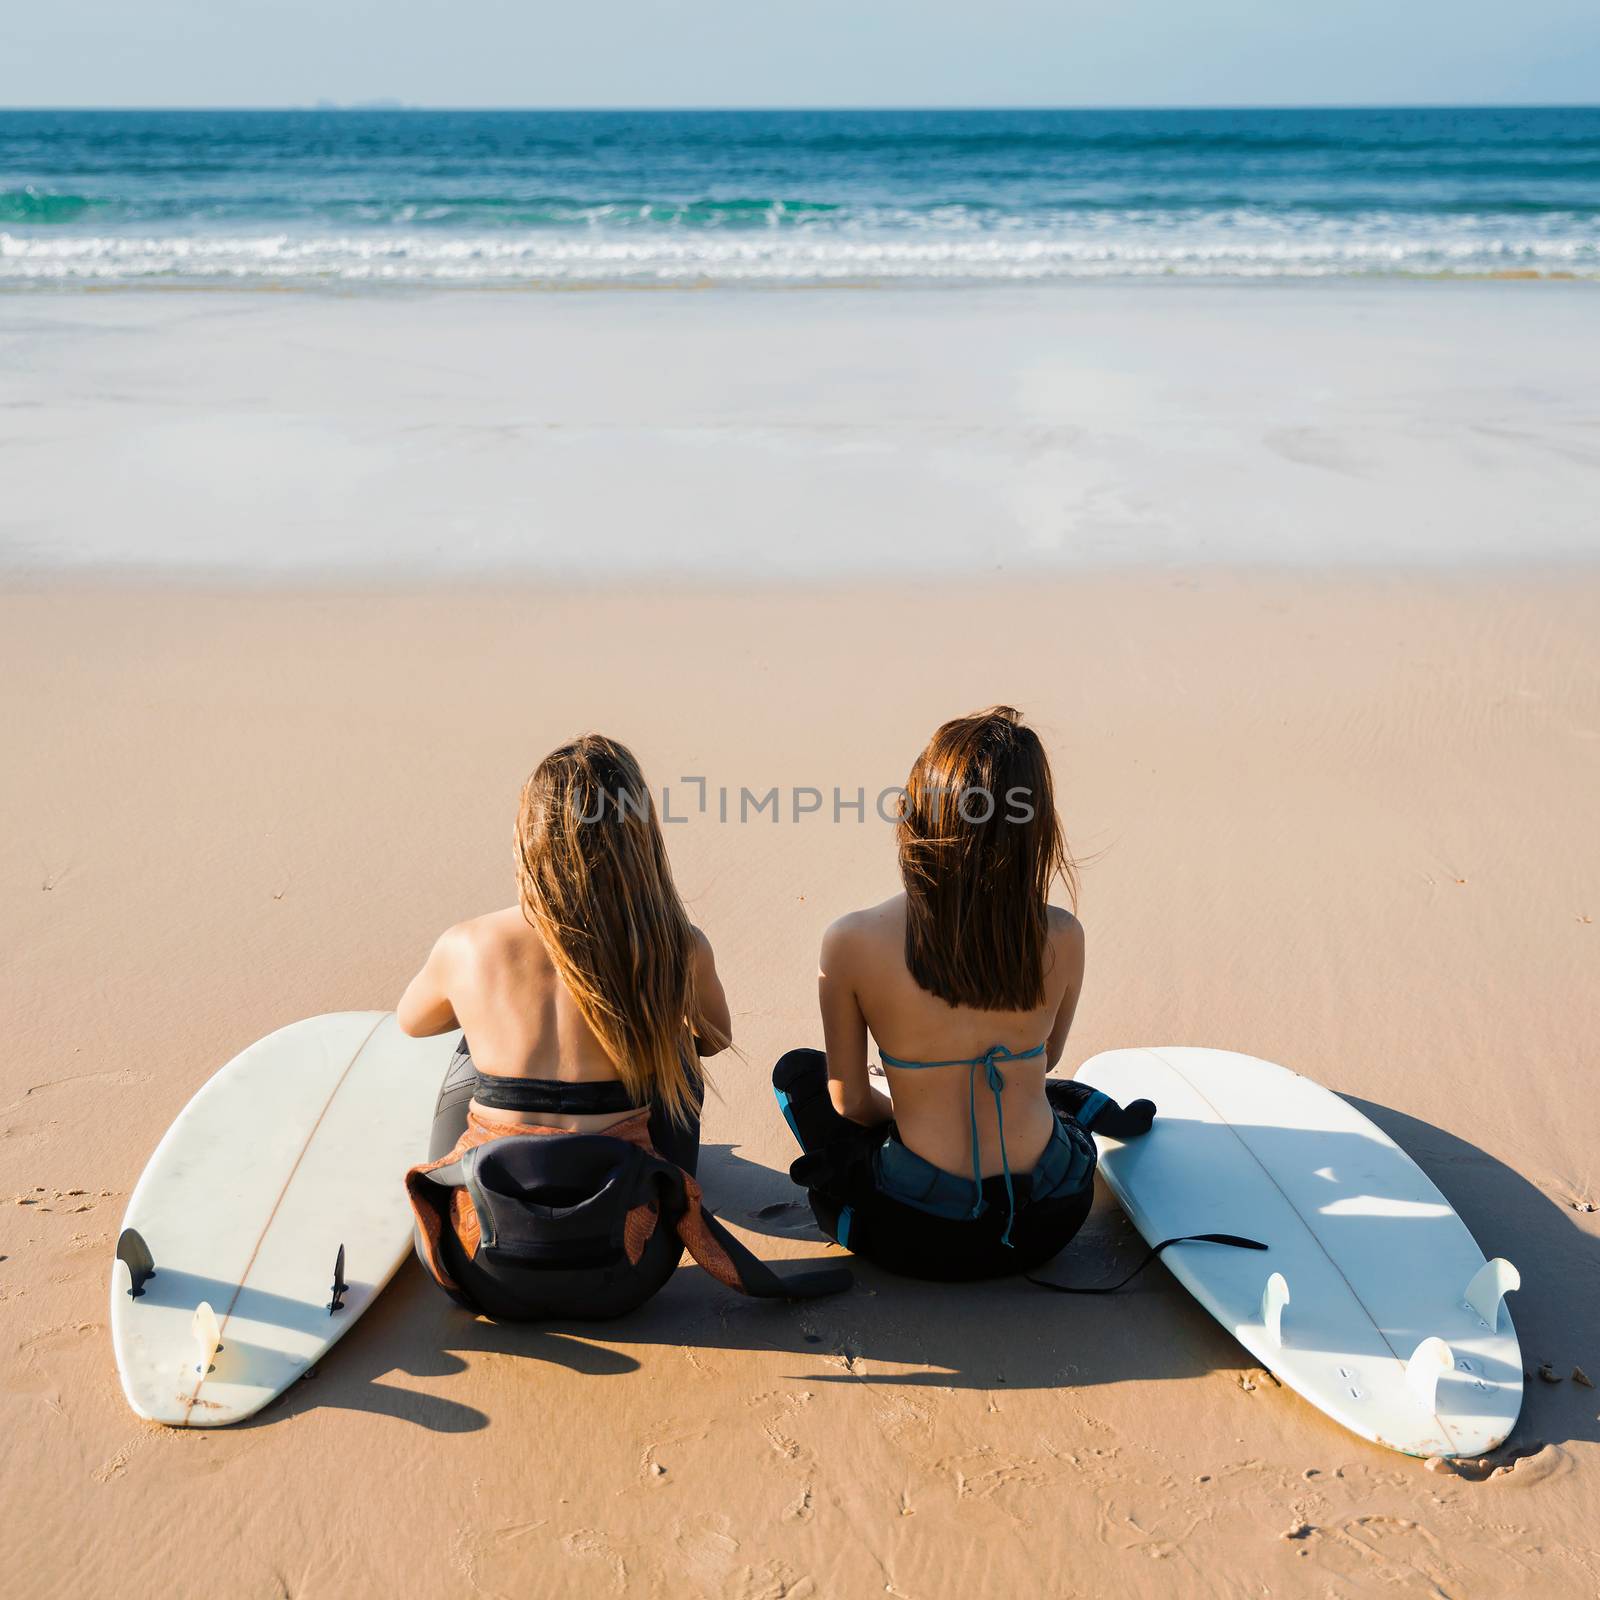 Two beautiful female friends at the beach sitting on the sand with her surfboards while looking to the ocean